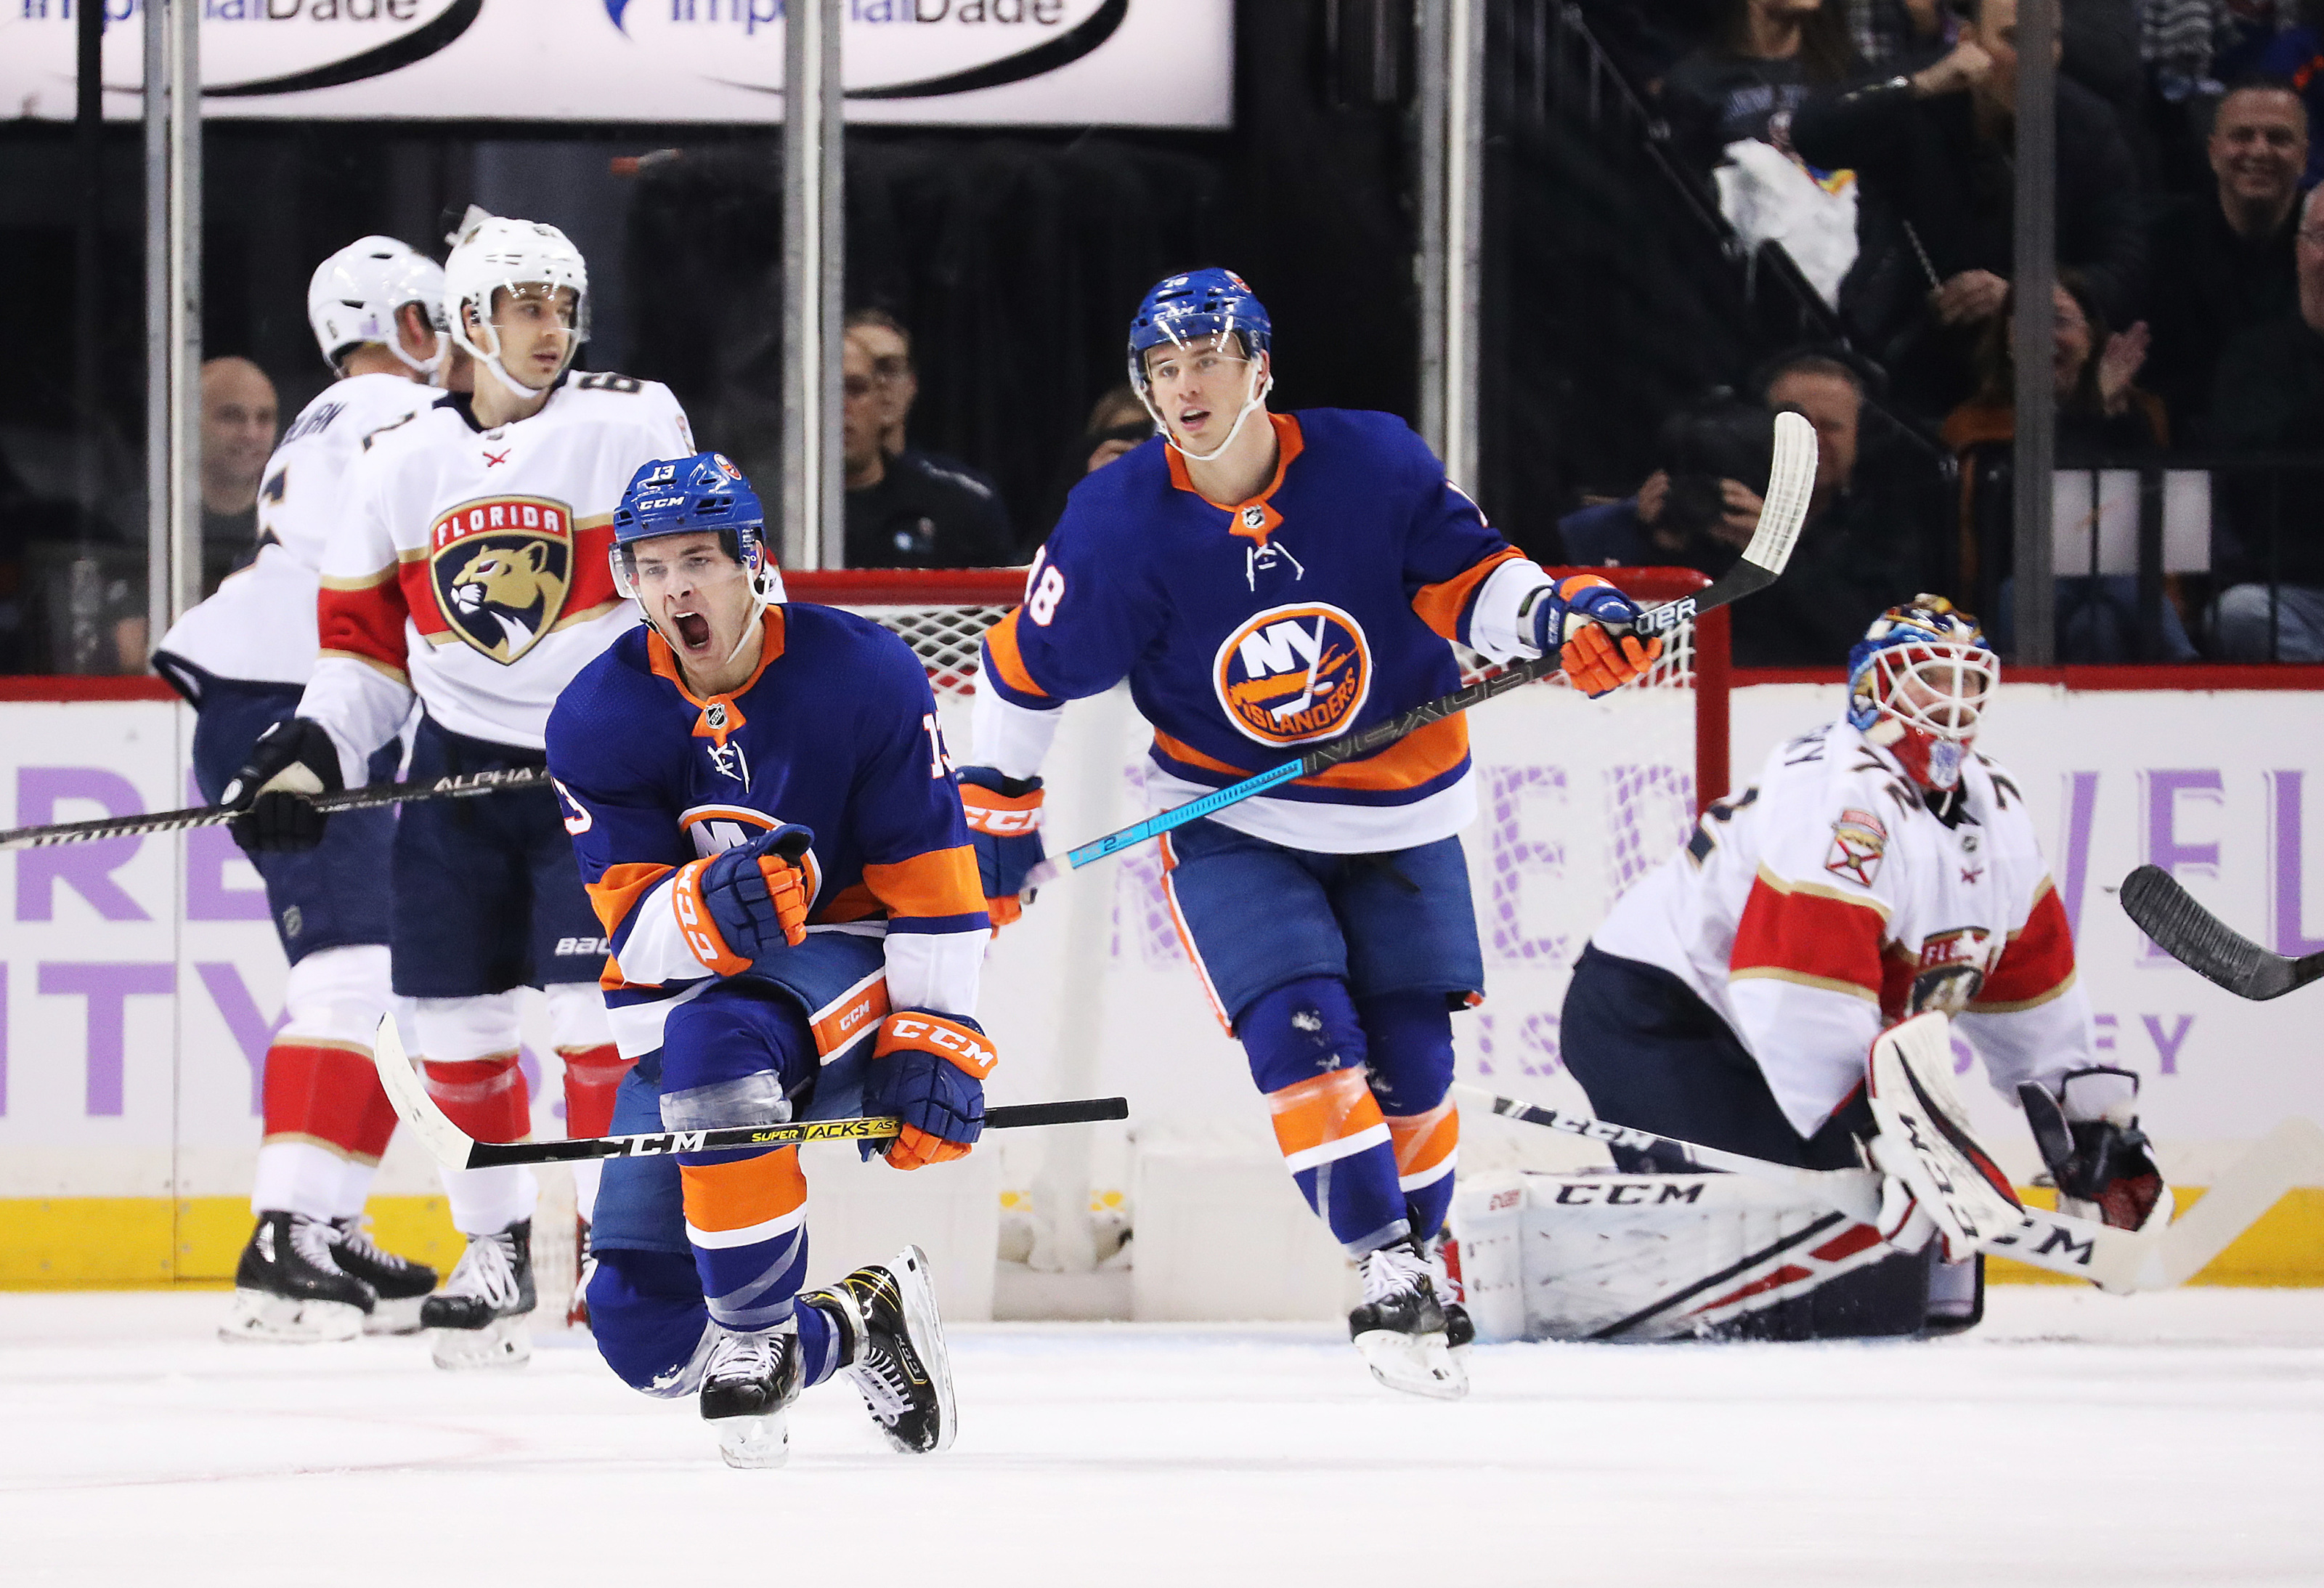 Mat Barzal planning to return to New York Islanders lineup for